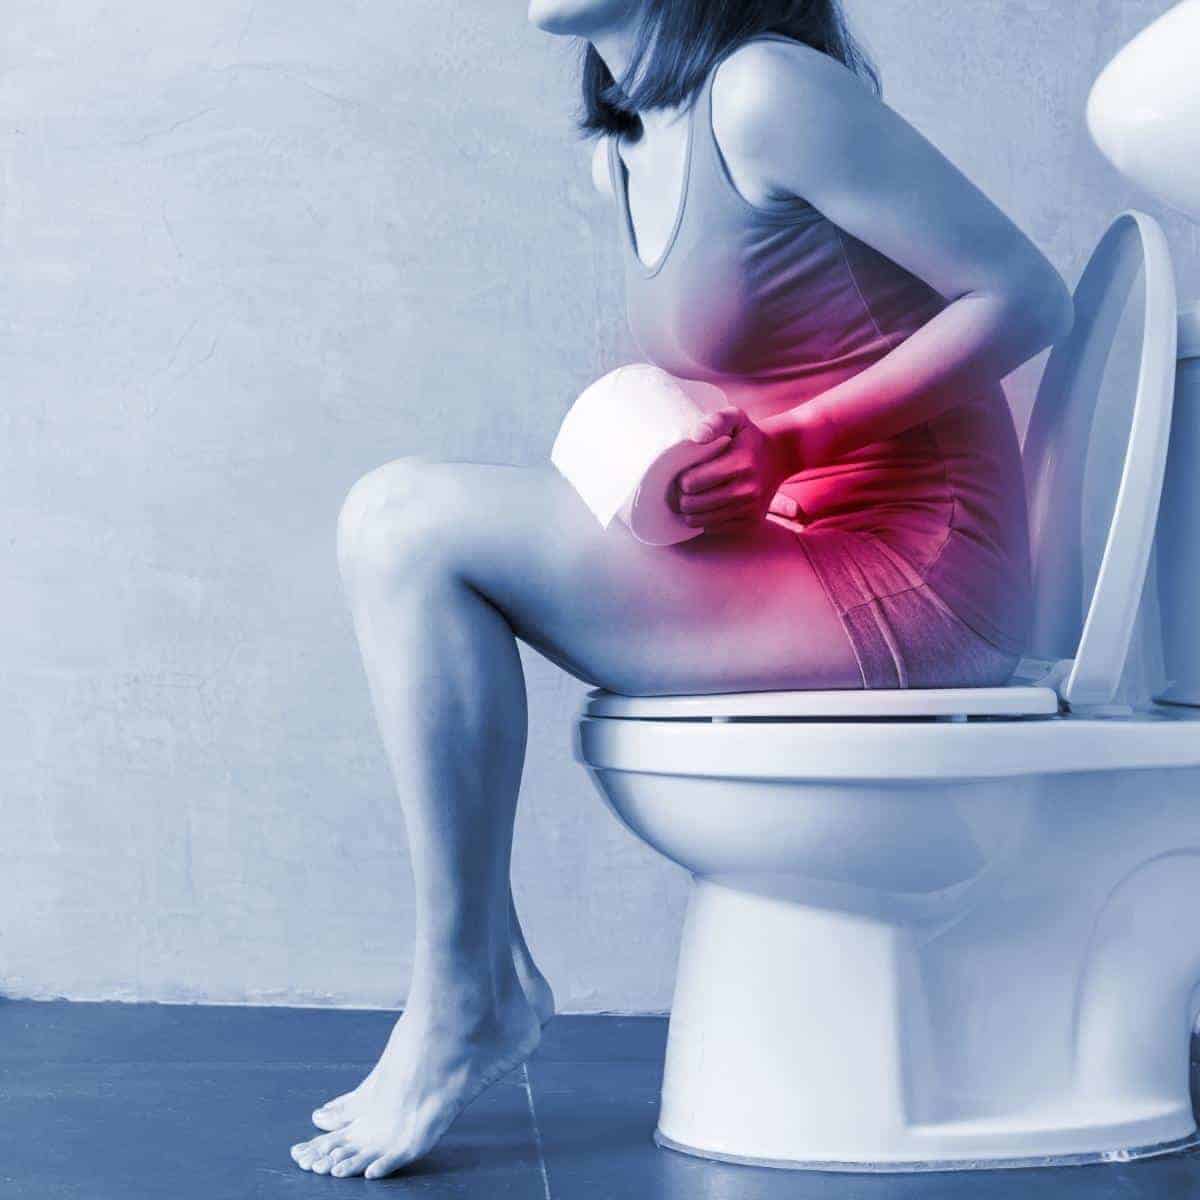 How to relieve constipation! All the tips you need when dieting